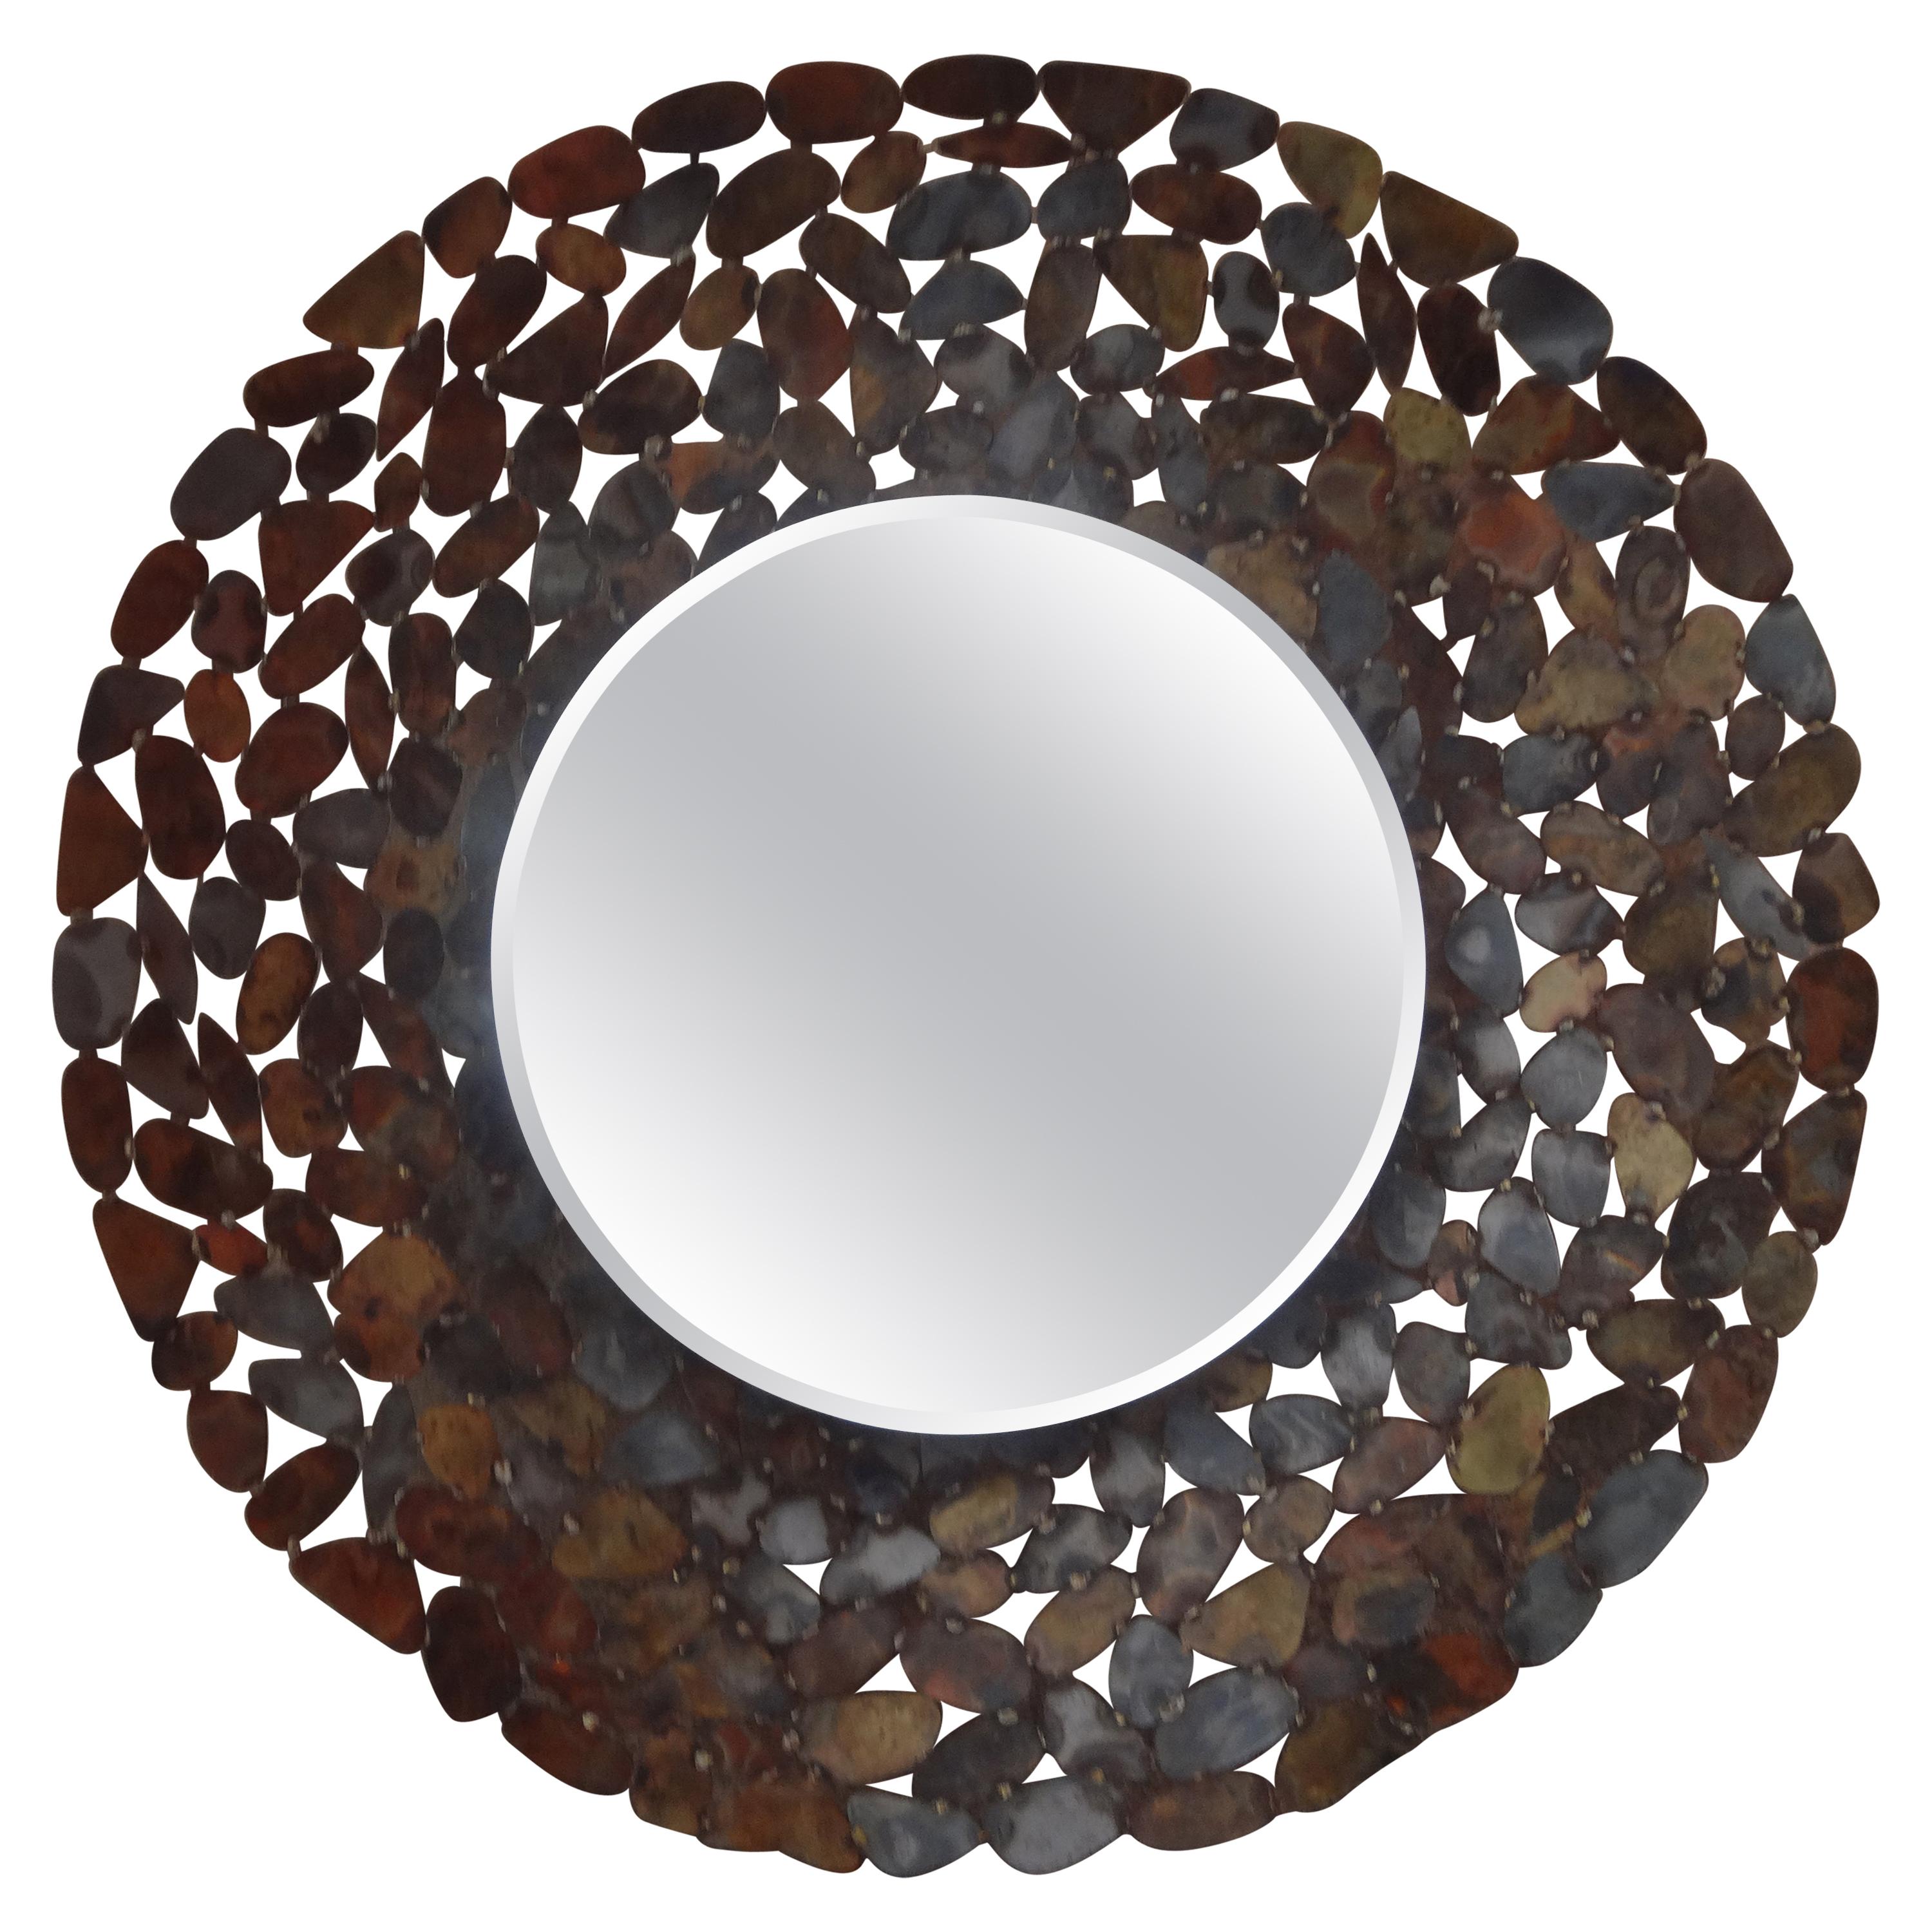 Curtis Jere Inspired Brutalist Torch Cut Metal Beveled Mirror For Sale 3